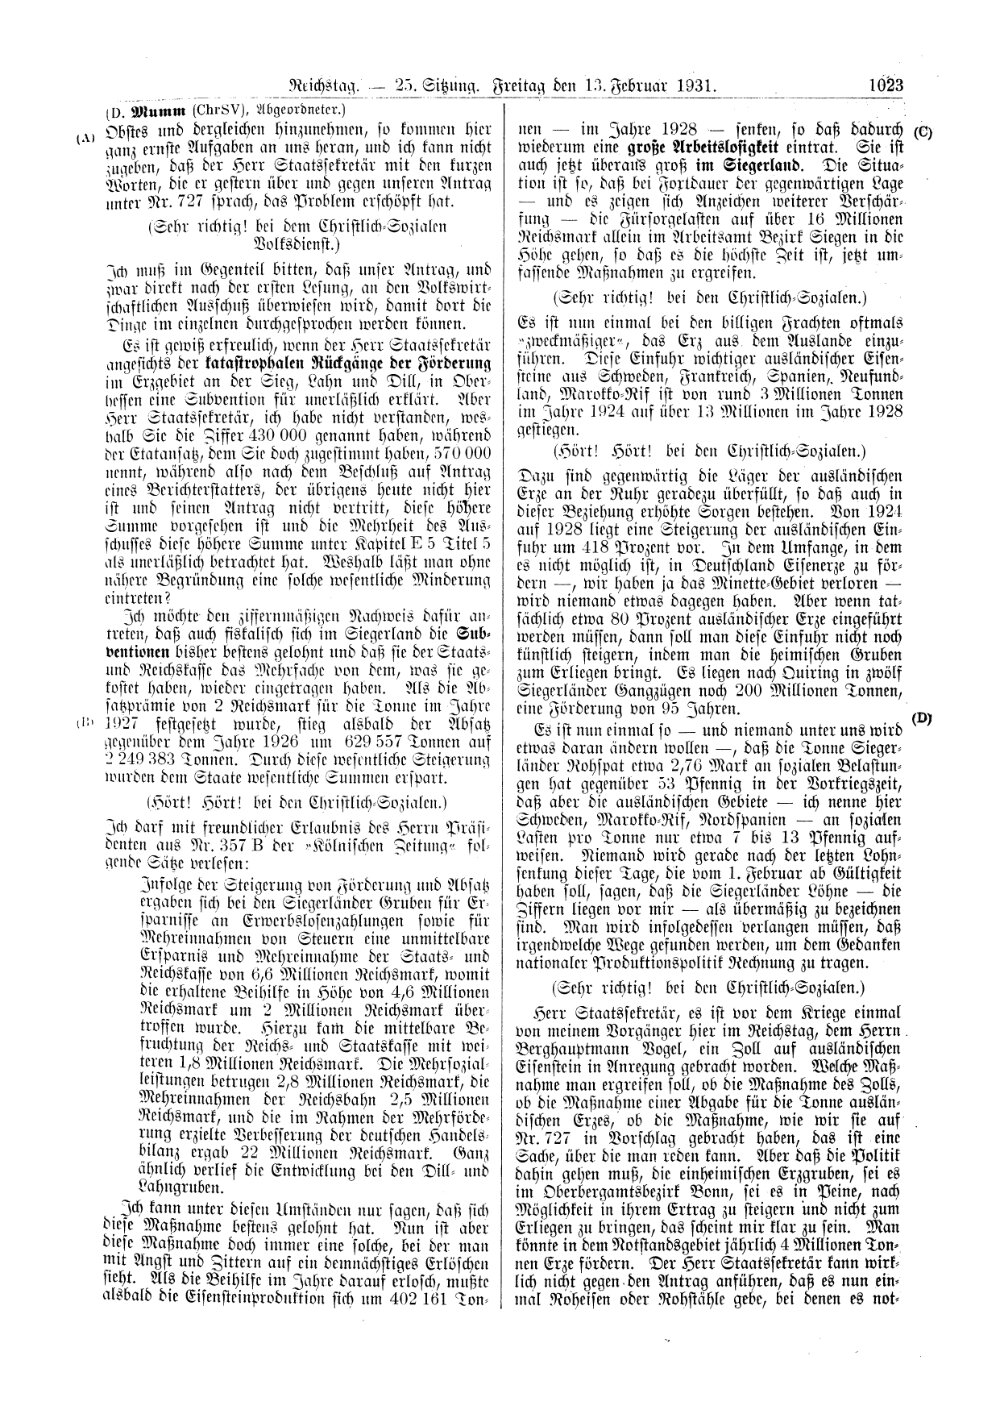 Scan of page 1023